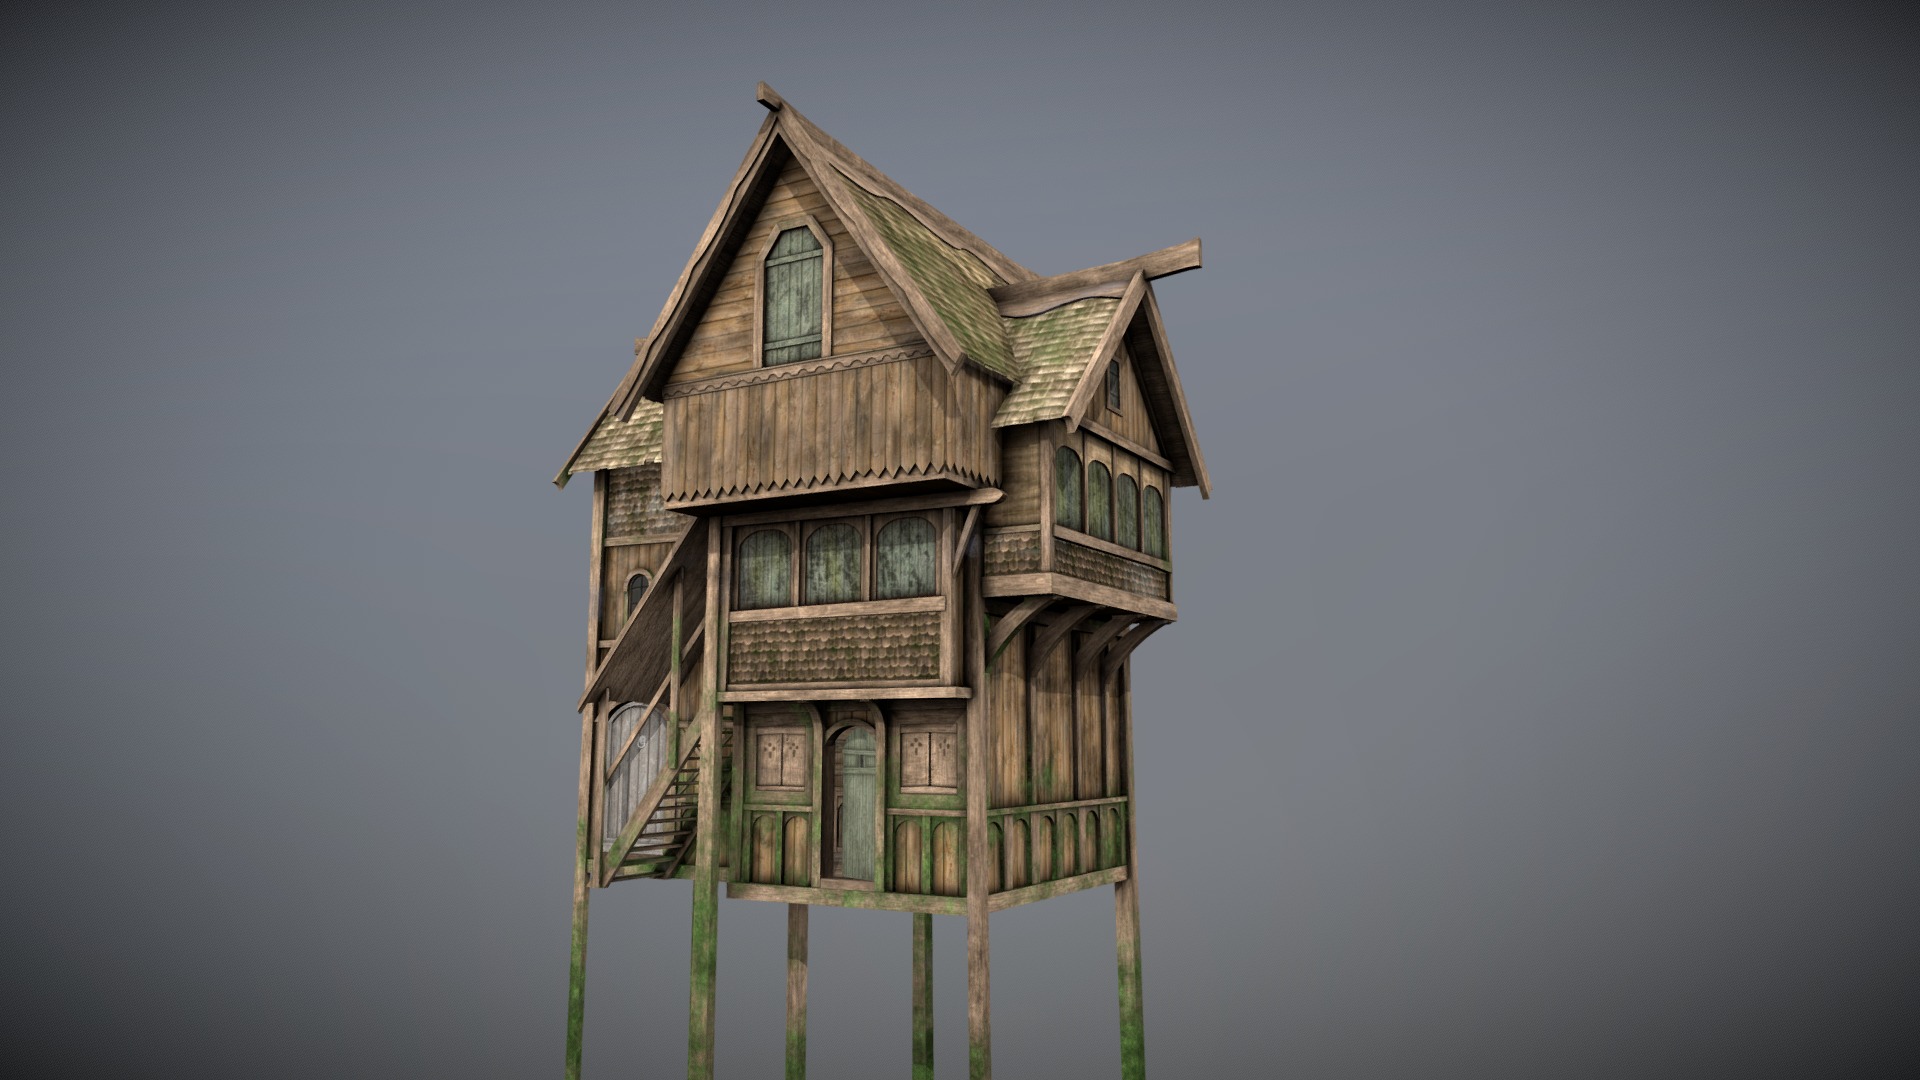 3D model Medieval Lake Village – House 5 with interiors - This is a 3D model of the Medieval Lake Village - House 5 with interiors. The 3D model is about a wooden house on a pole.